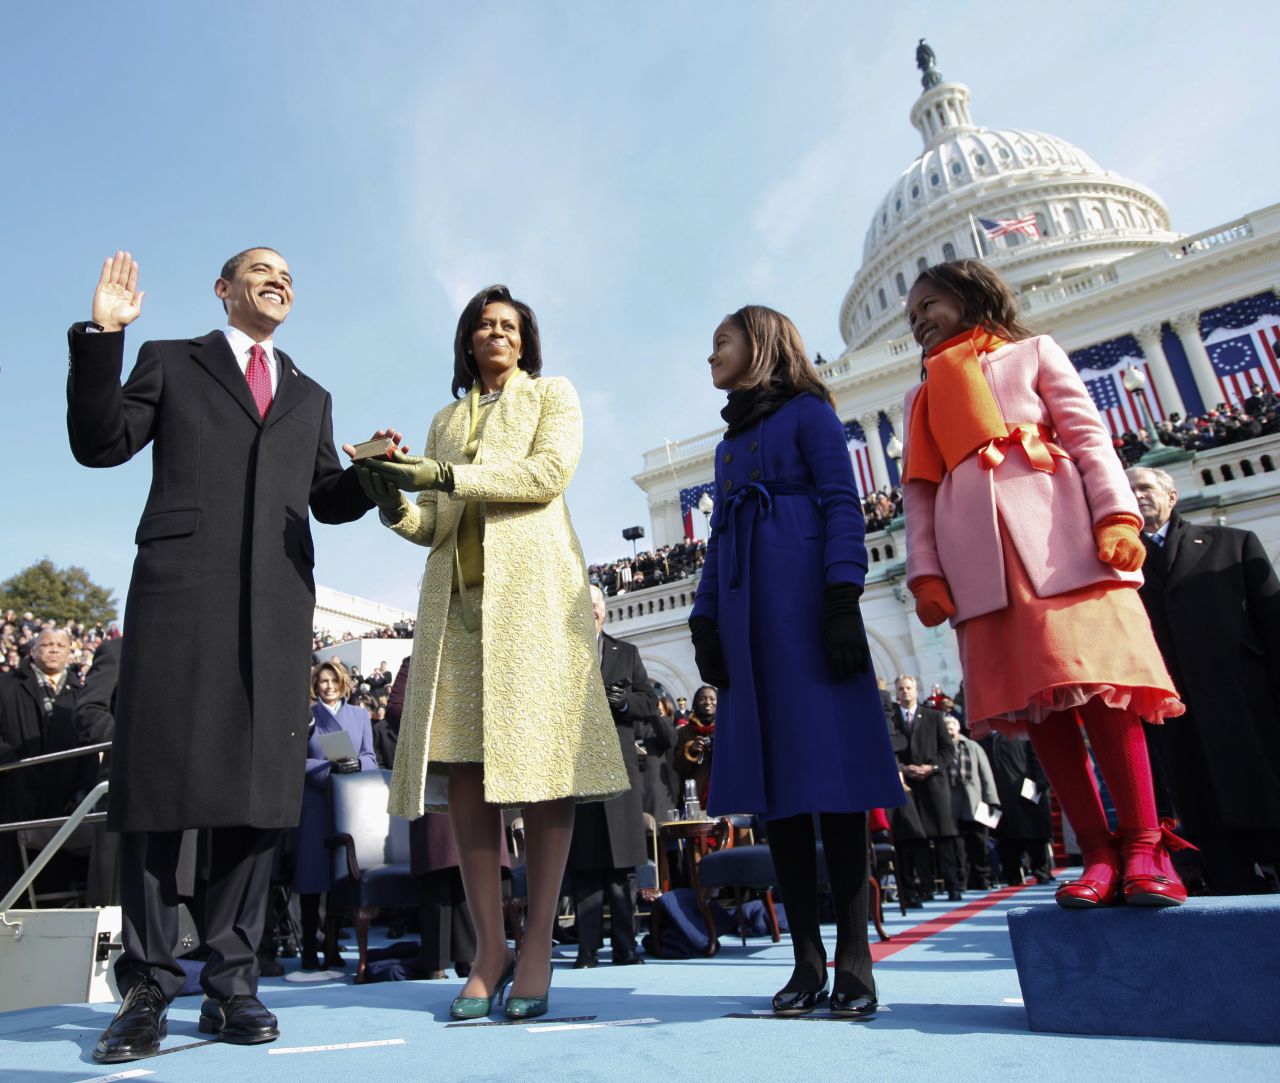 Obama takes the oath of office with his family by his side on January 20, 2009, at the US Capitol. Sasha is at far right, next to Malia.